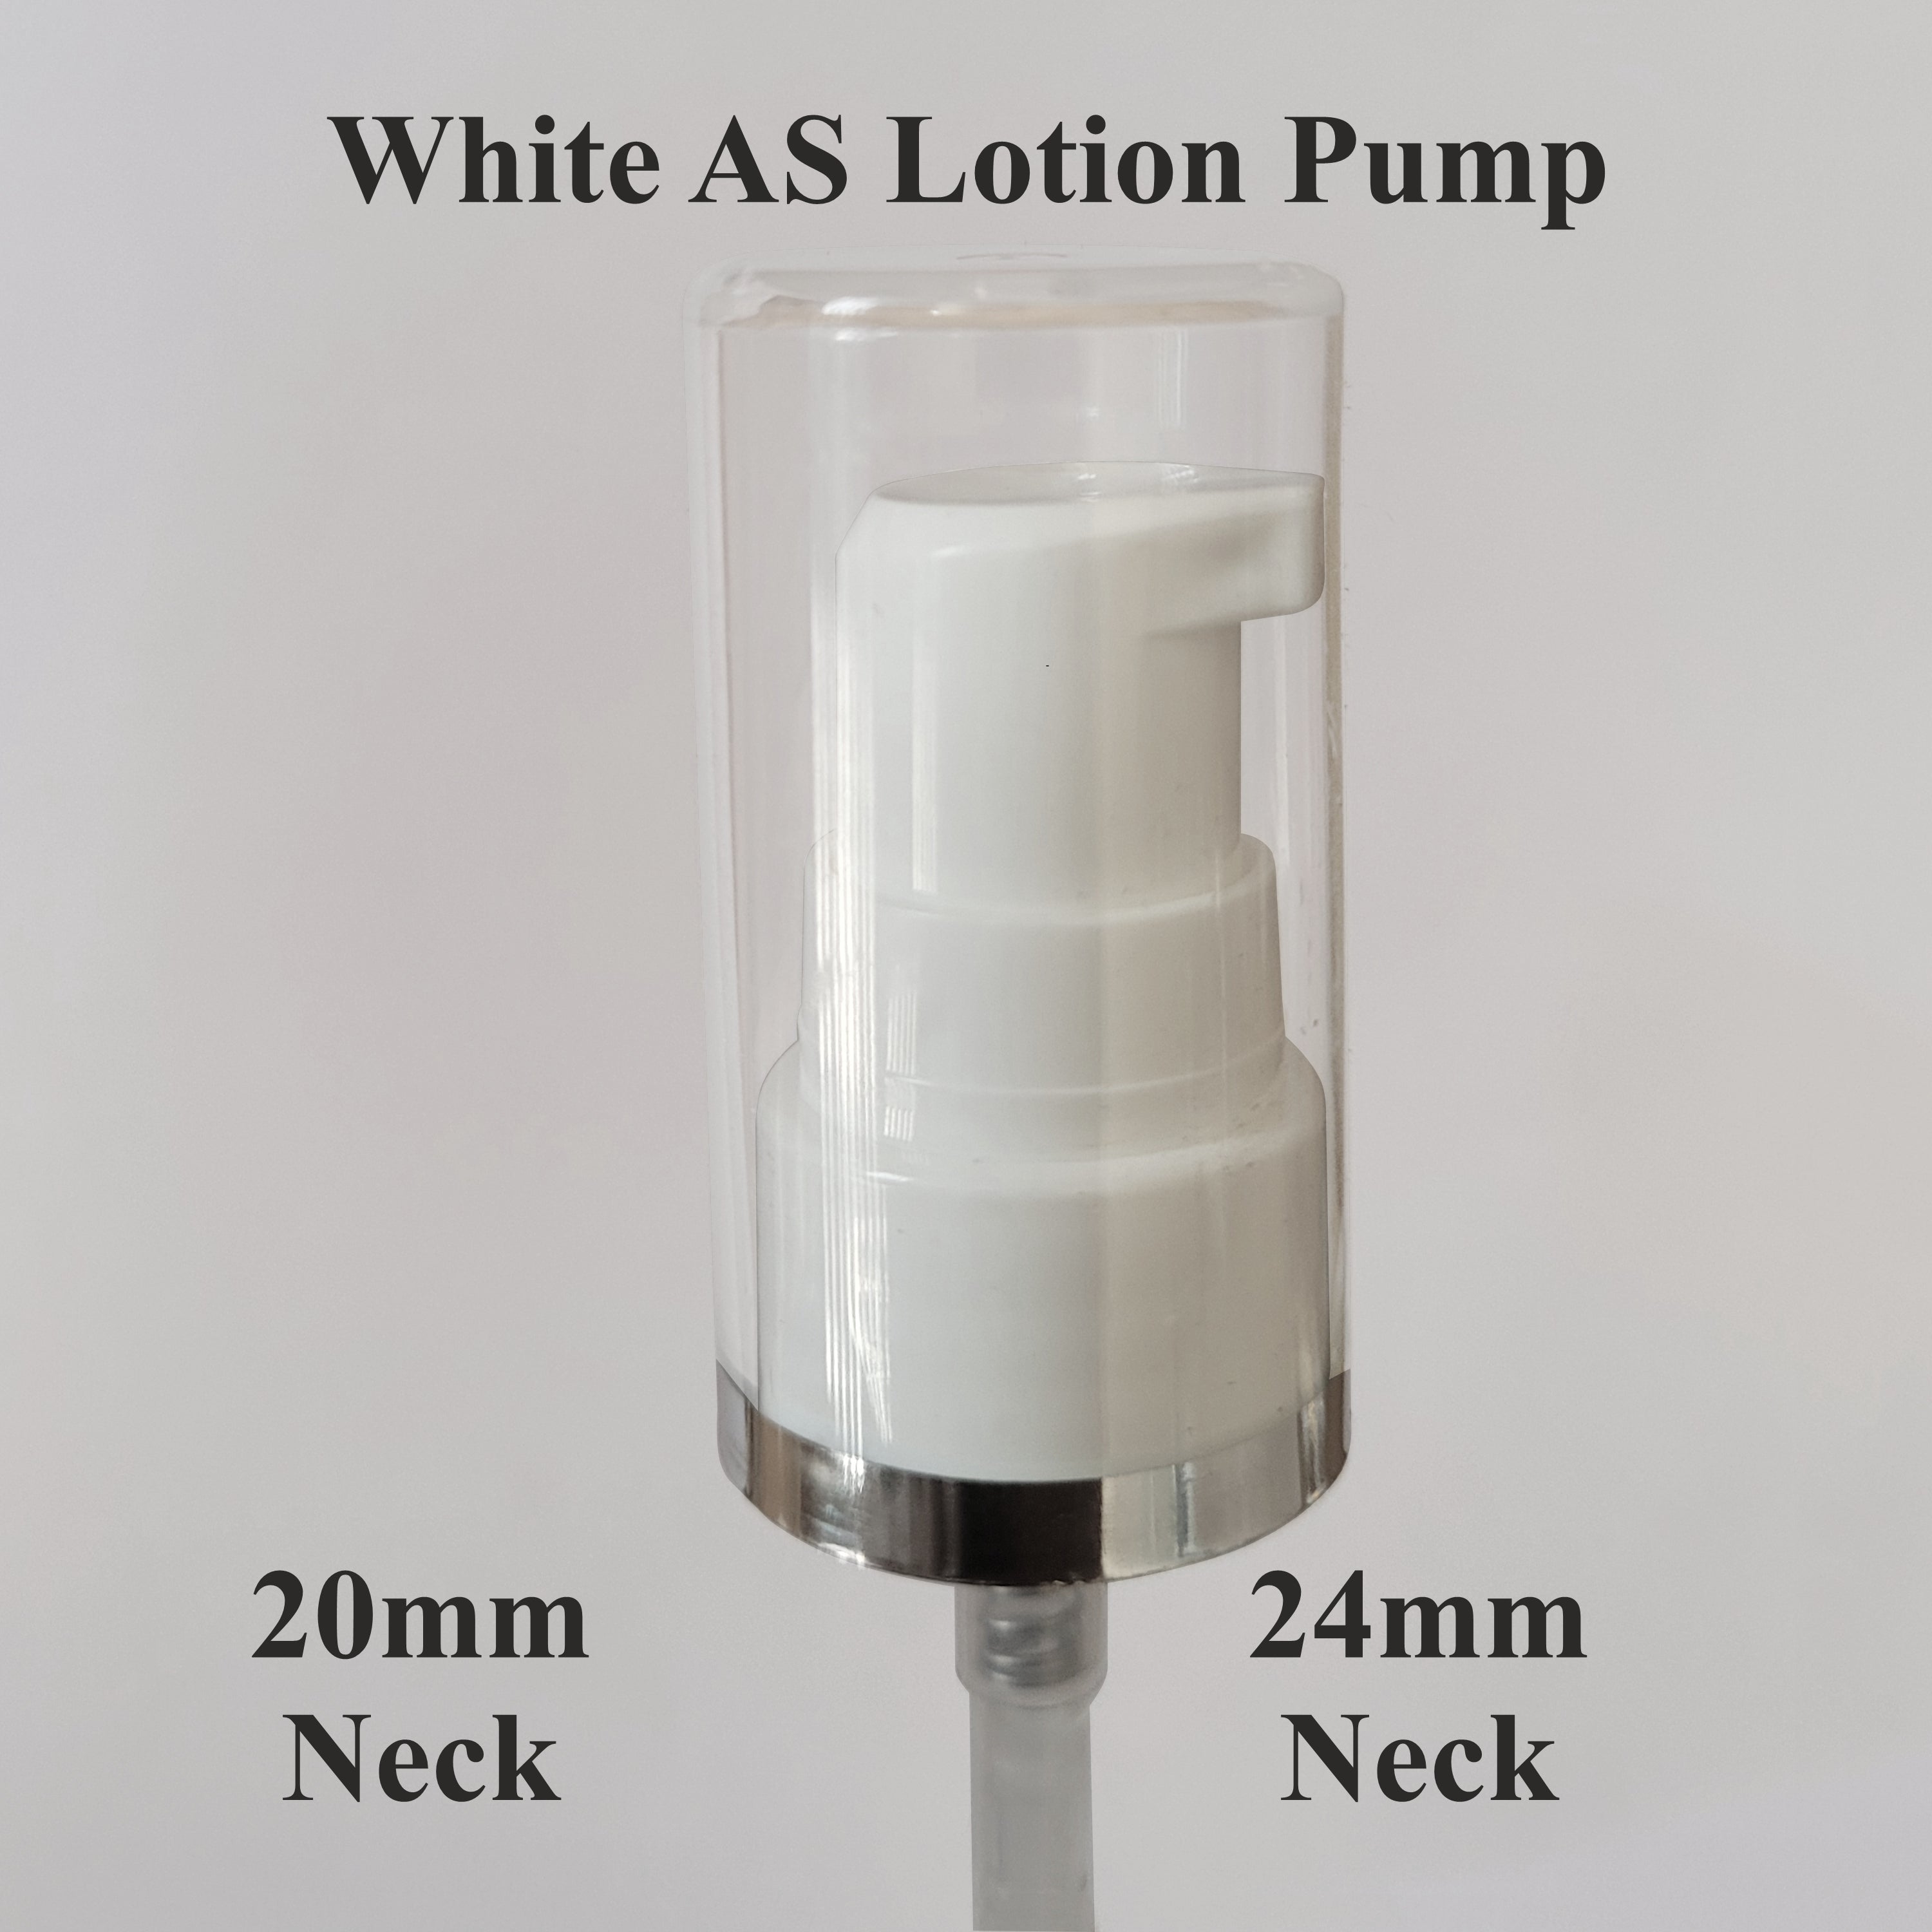 [ZMPC11] White Color AS Lotion Pump with Beautiful Silver Streak Transparent Cap- 20mm & 24mm Neck